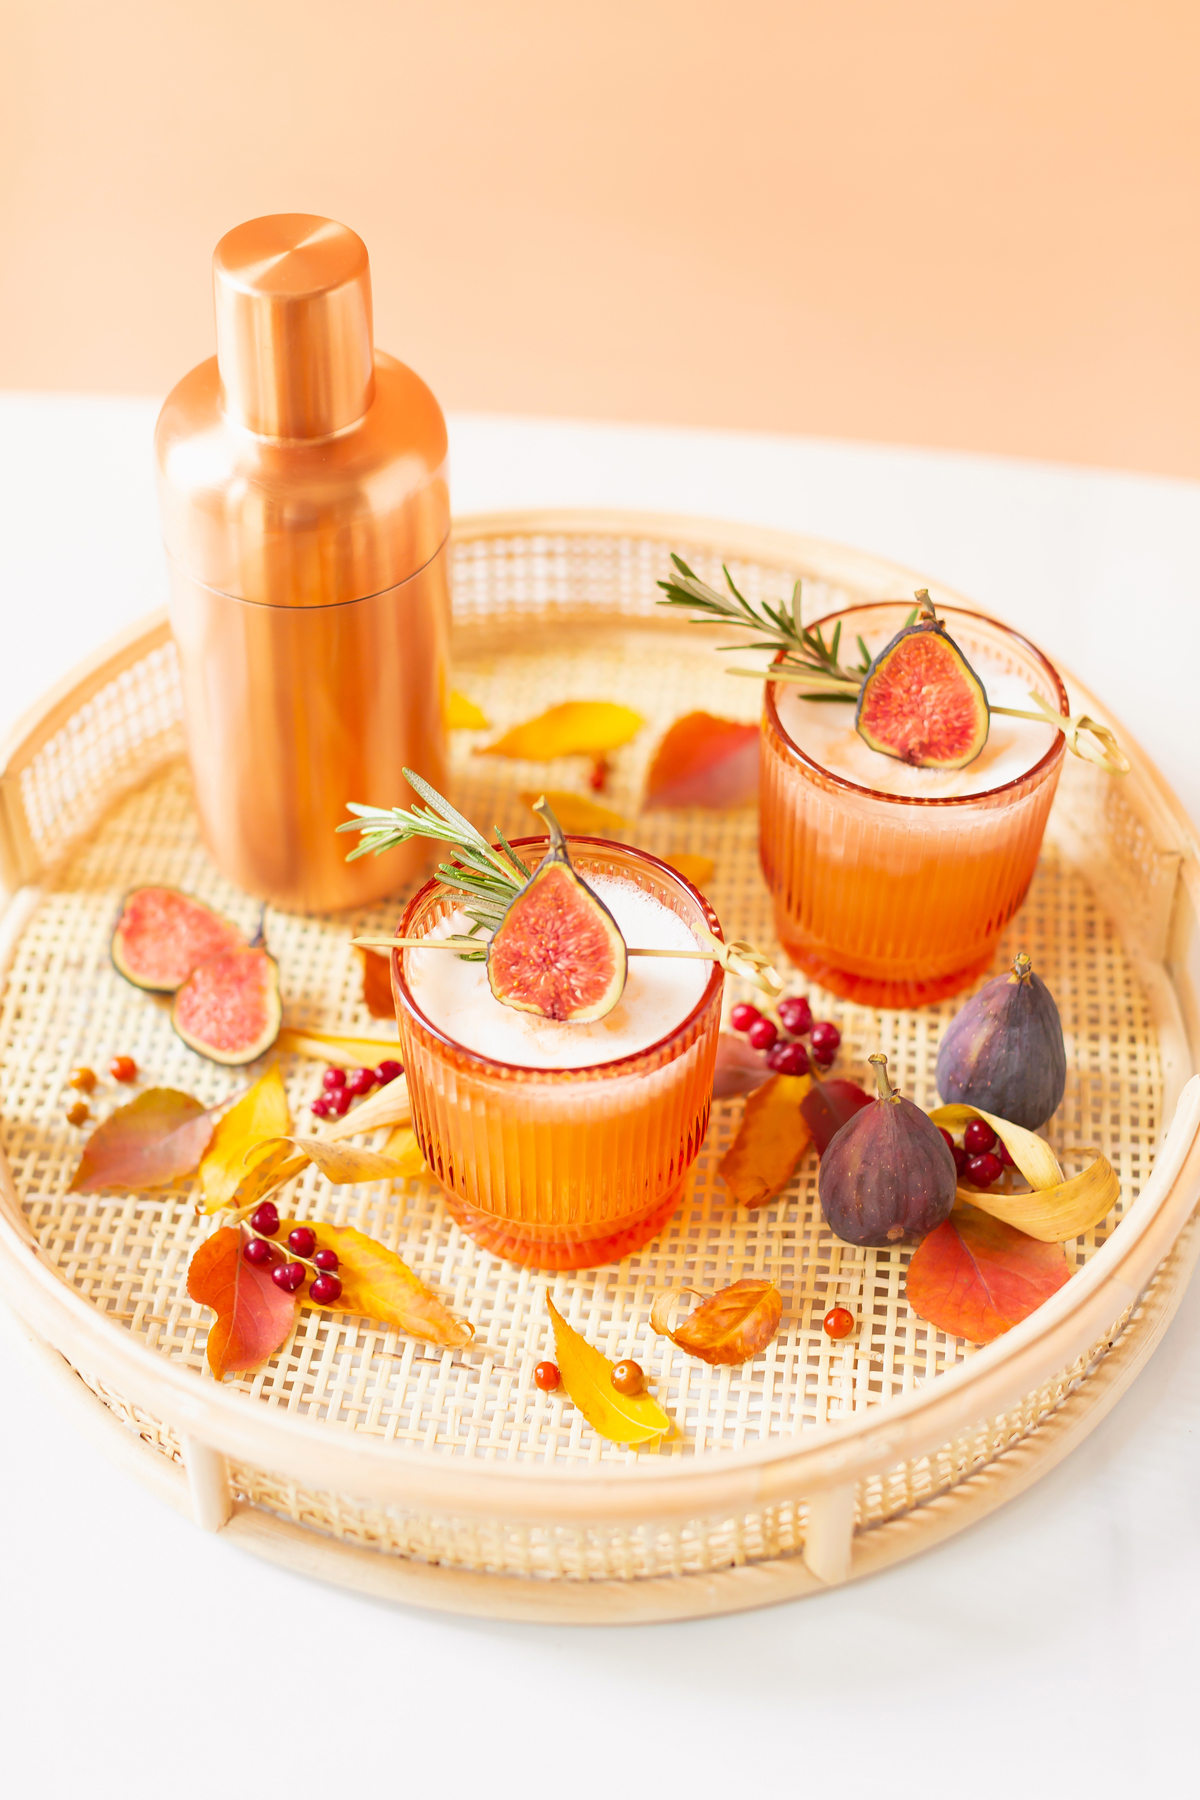 5 Cozy Fall Cocktail and Sangria Recipes | JustineCelina’s Best Fall Cocktail and Sangria Recipes | Rosemary Fig Japanese Whisky Sour | A Whisky Sour Cocktail with a Fresh Fig Garnish on a Rattan Serving Tray with Autumn Leaves and a Brass Cocktail Shaker in the Background | Autumn Whiskey Cocktails | Best Fall Whisky Cocktail Recipes | Fall Fig Cocktail | Japanese Whisky Cocktail | Nikka Super Rare Old Cocktail | Calgary Cocktail Photographer and Stylist | Calgary Blogger // JustineCelina.com